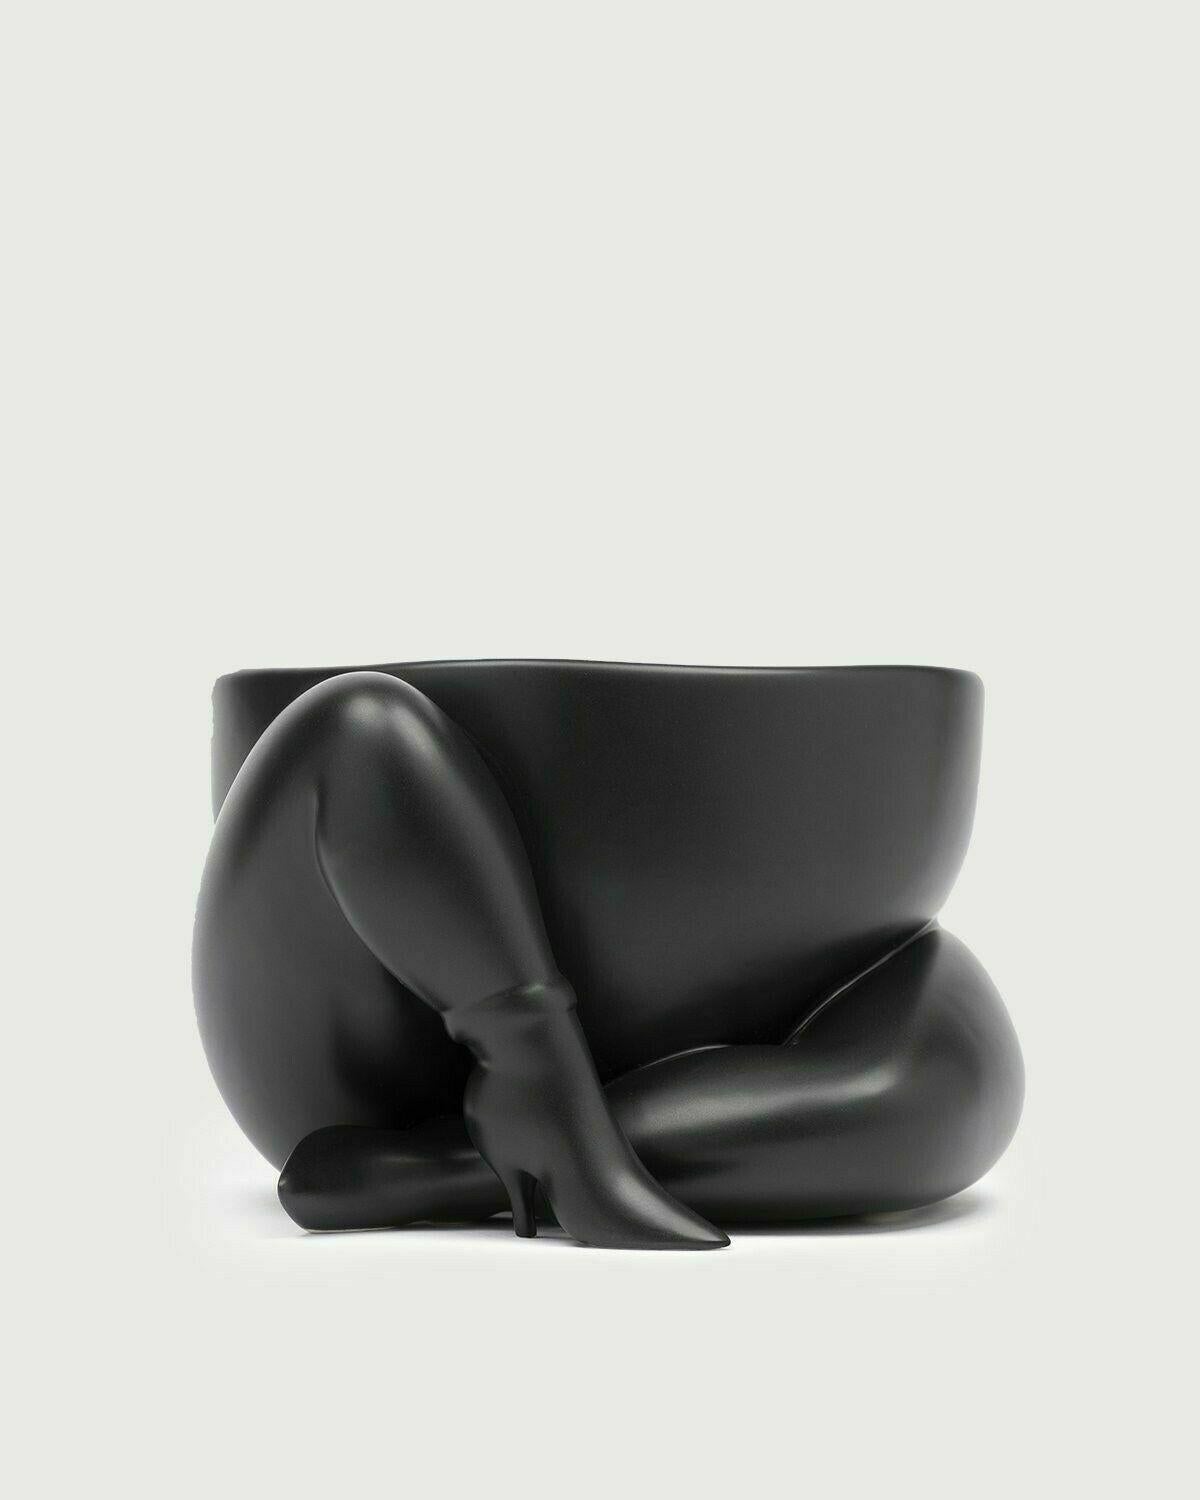 Up for sale is a rare and highly sought-after set of planters by the acclaimed Dutch artist, Parra. Titled 